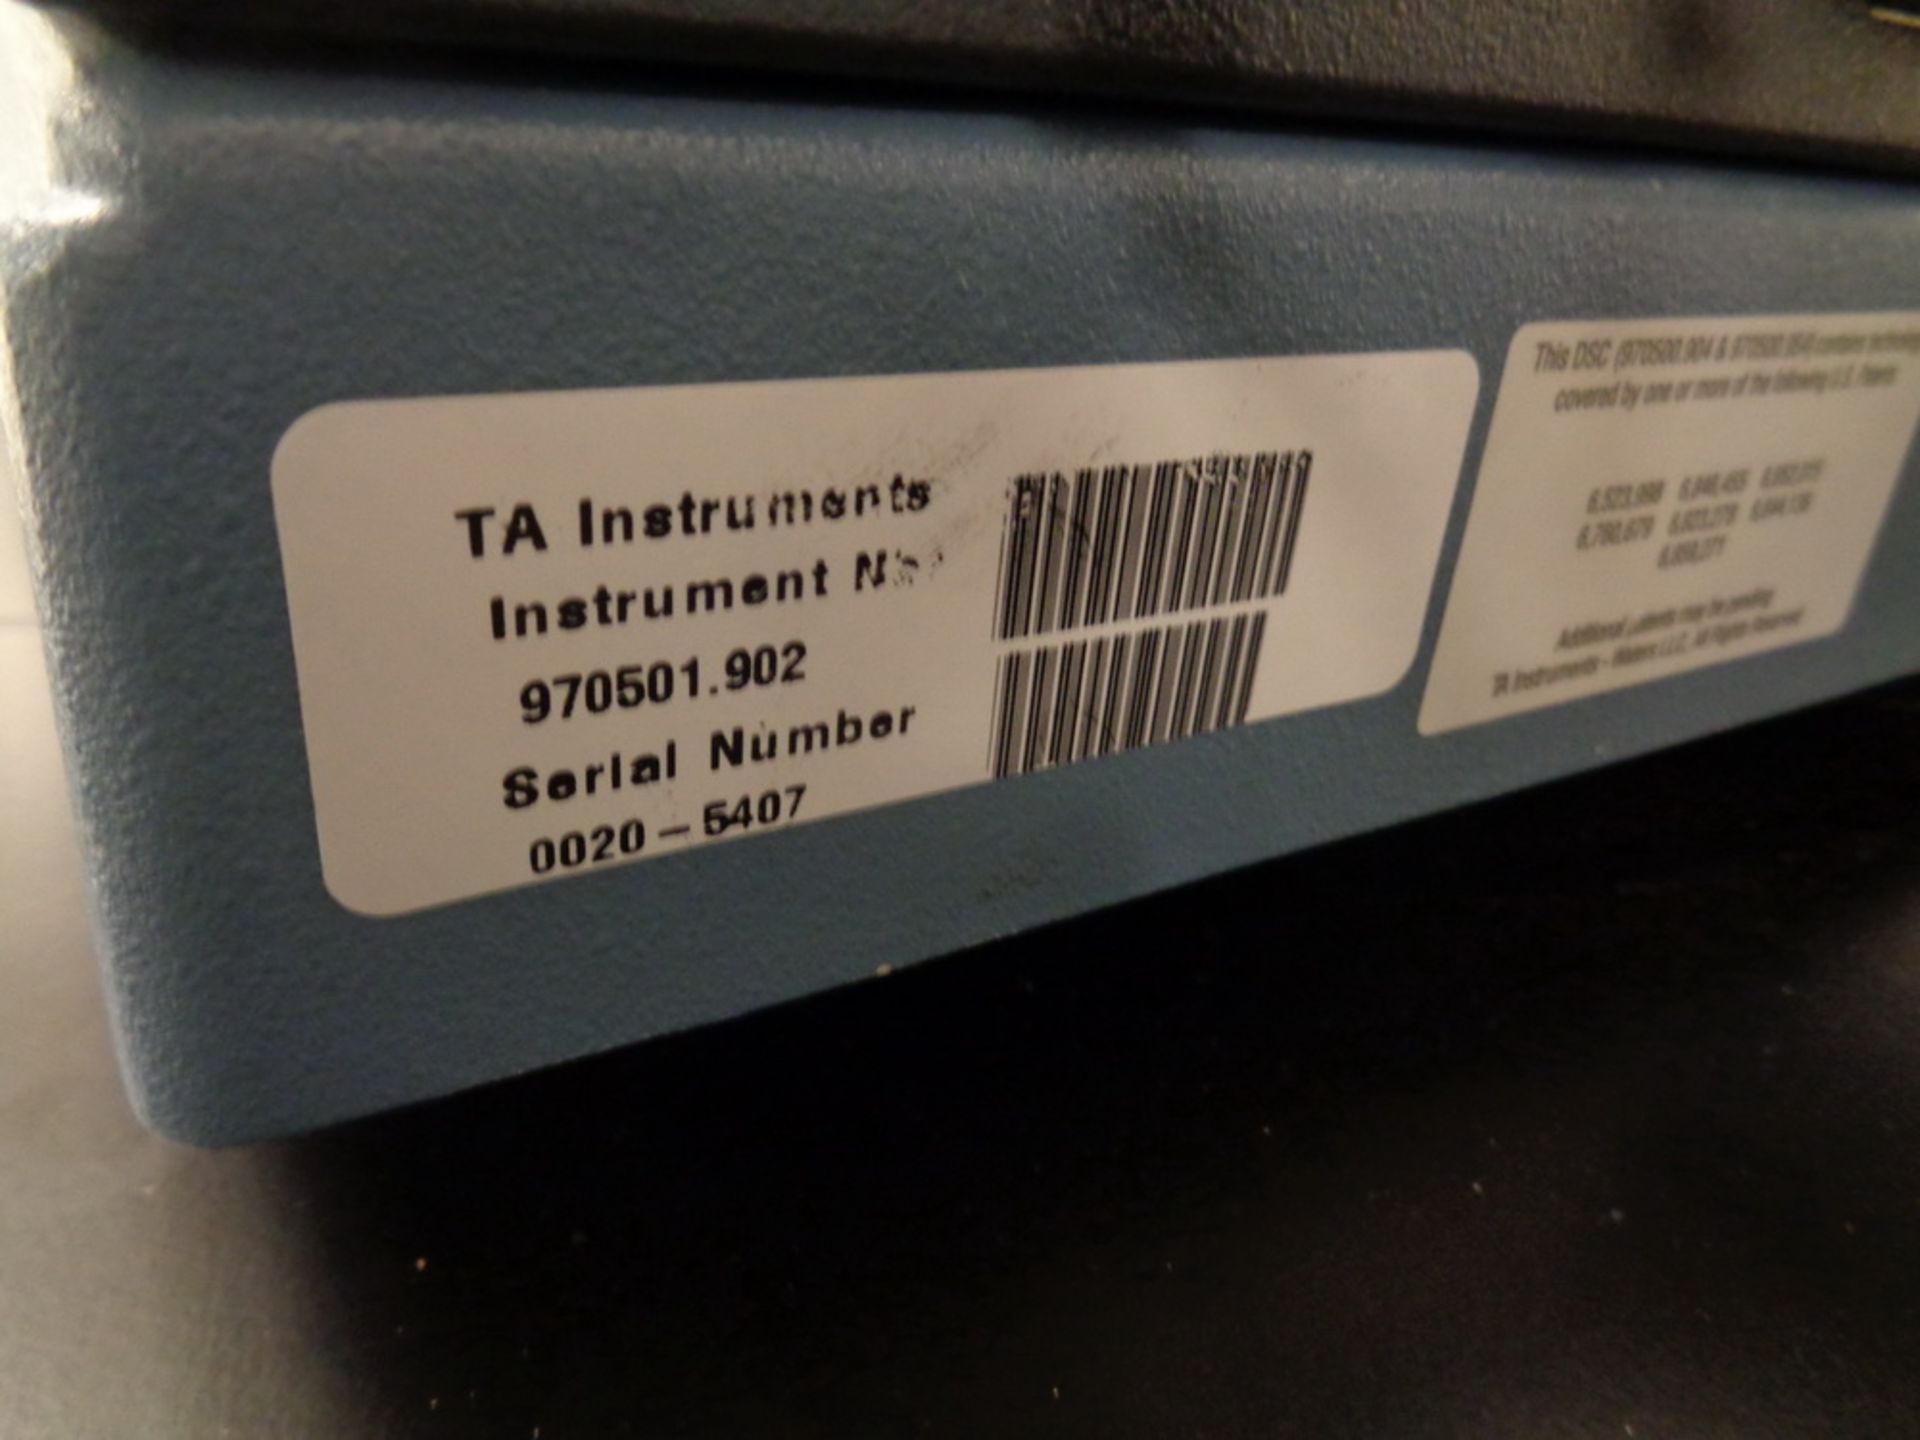 TA Systems DSCQ20 Differential Scanning Calorimeter, S/N 0020-5407 w/ Immersion Cooler - Image 4 of 5